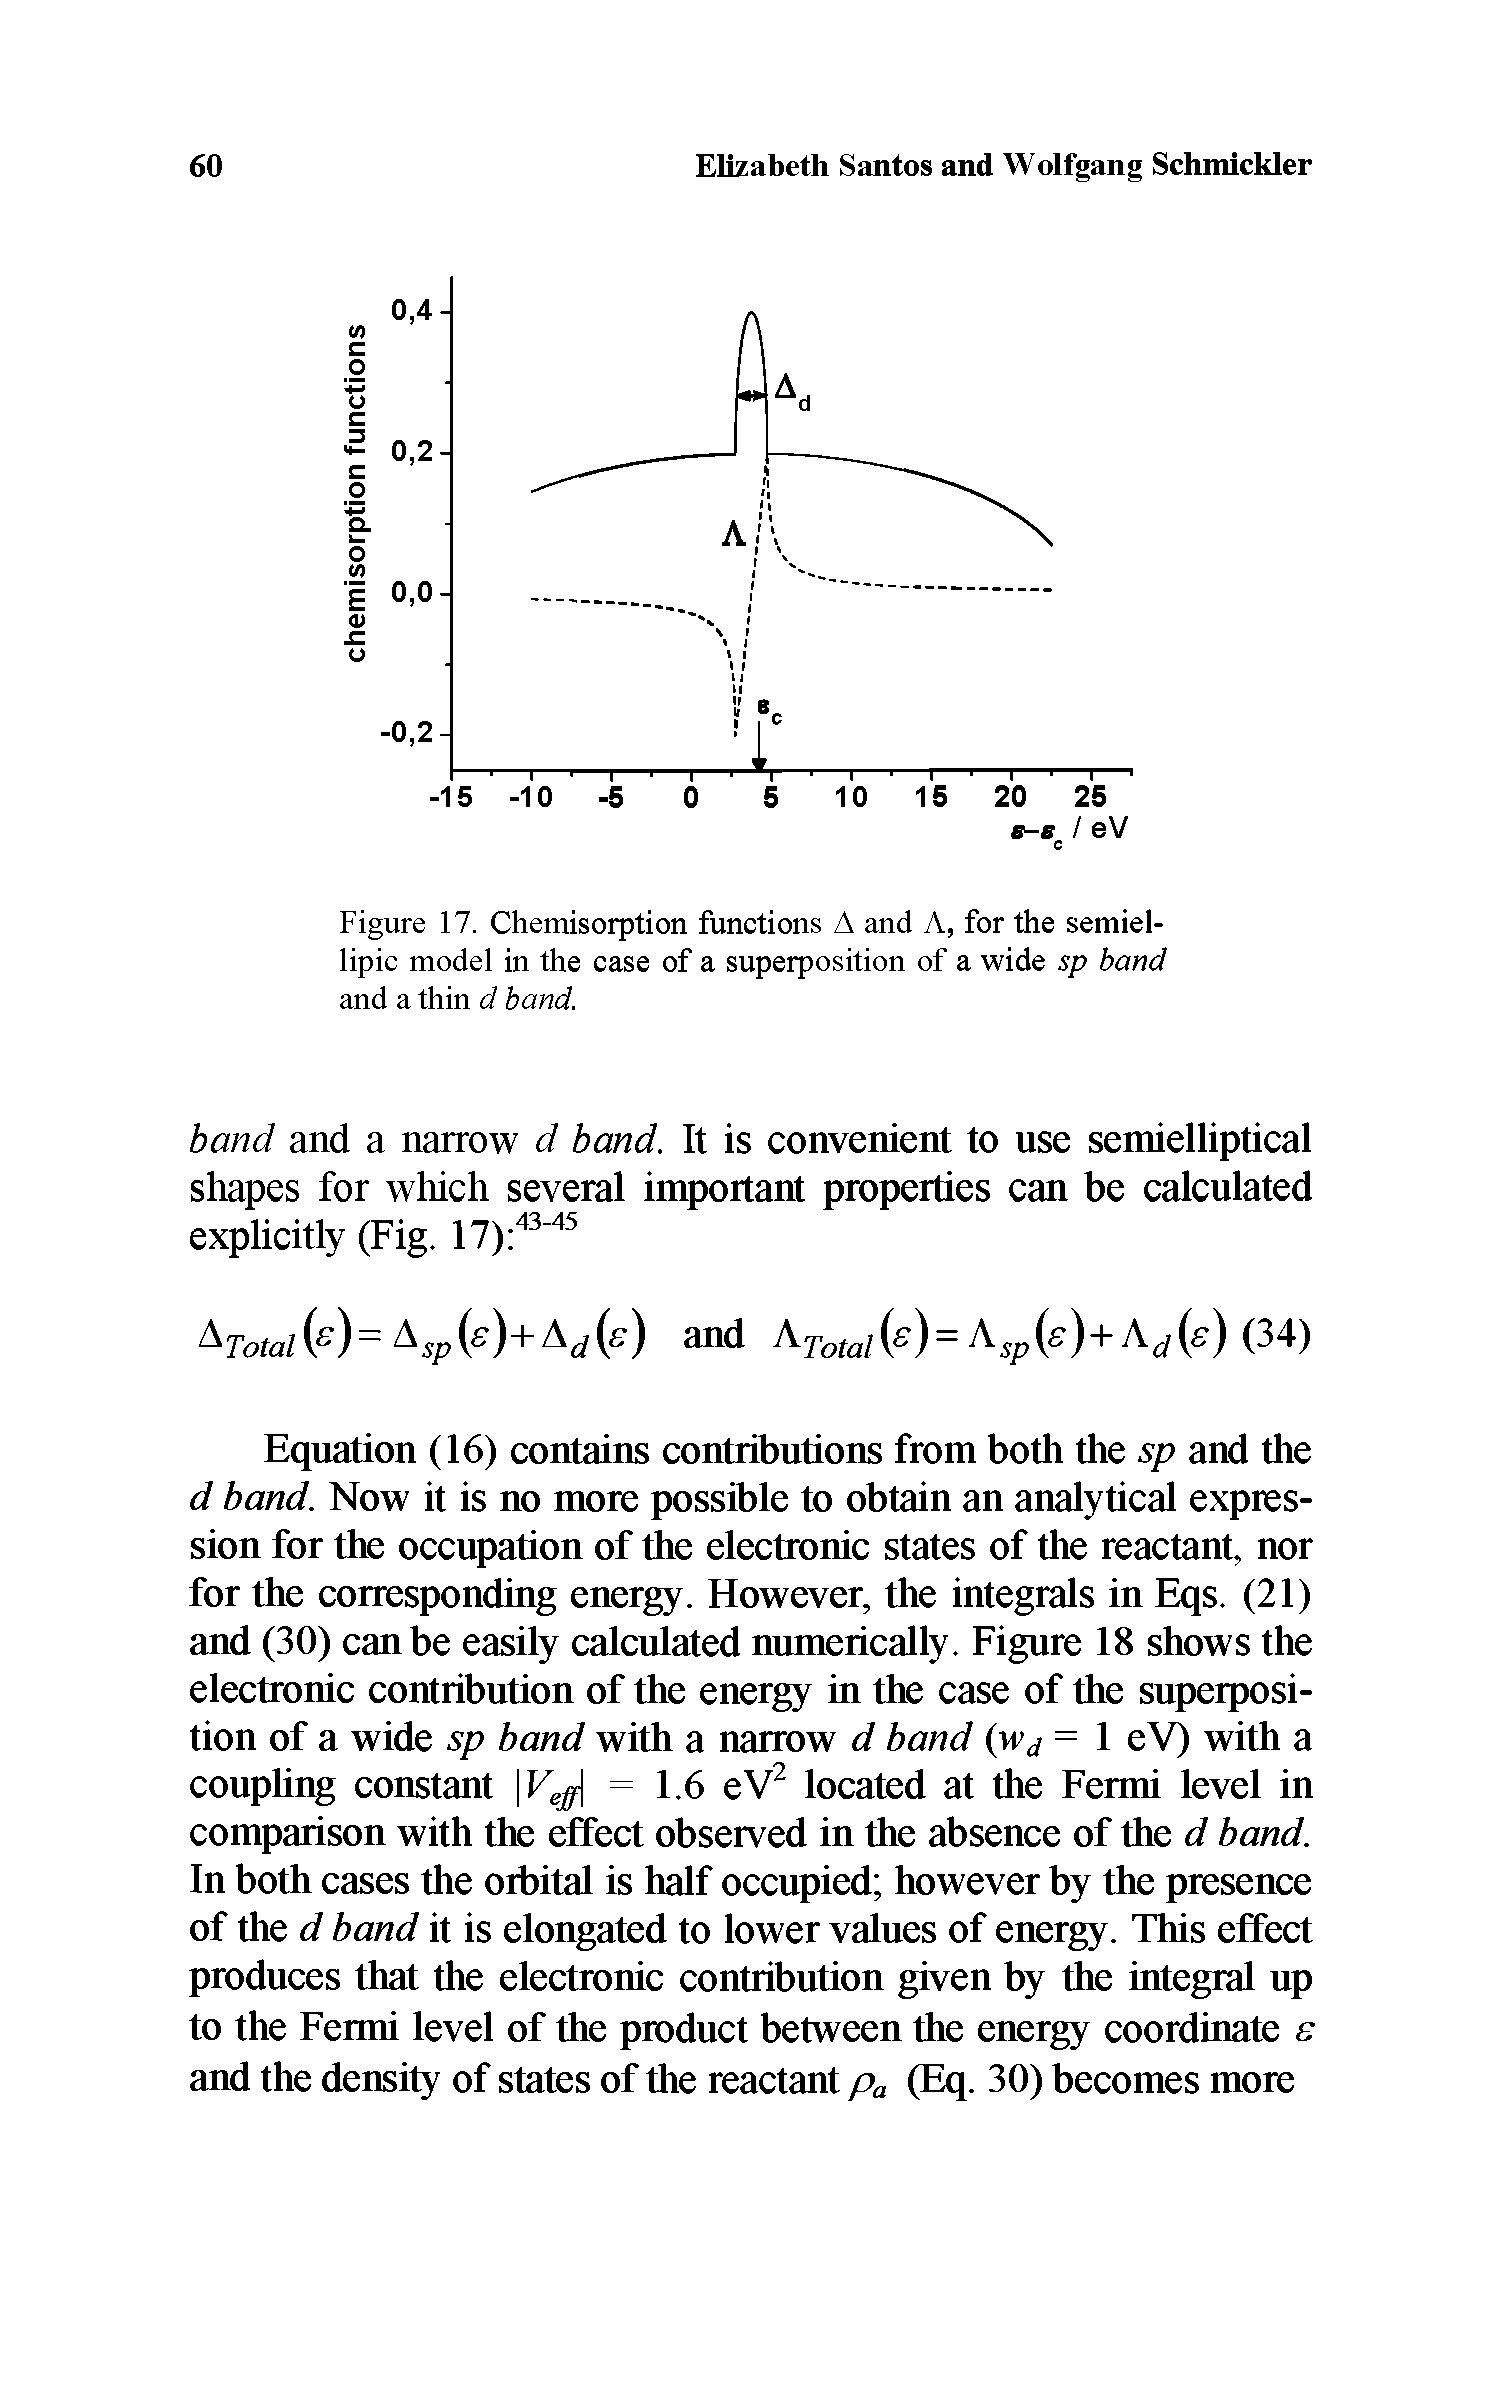 Figure 17. Chemisorption functions A and A, for the semiel-lipic model in the case of a superposition of a wide sp band and a thin d hand.